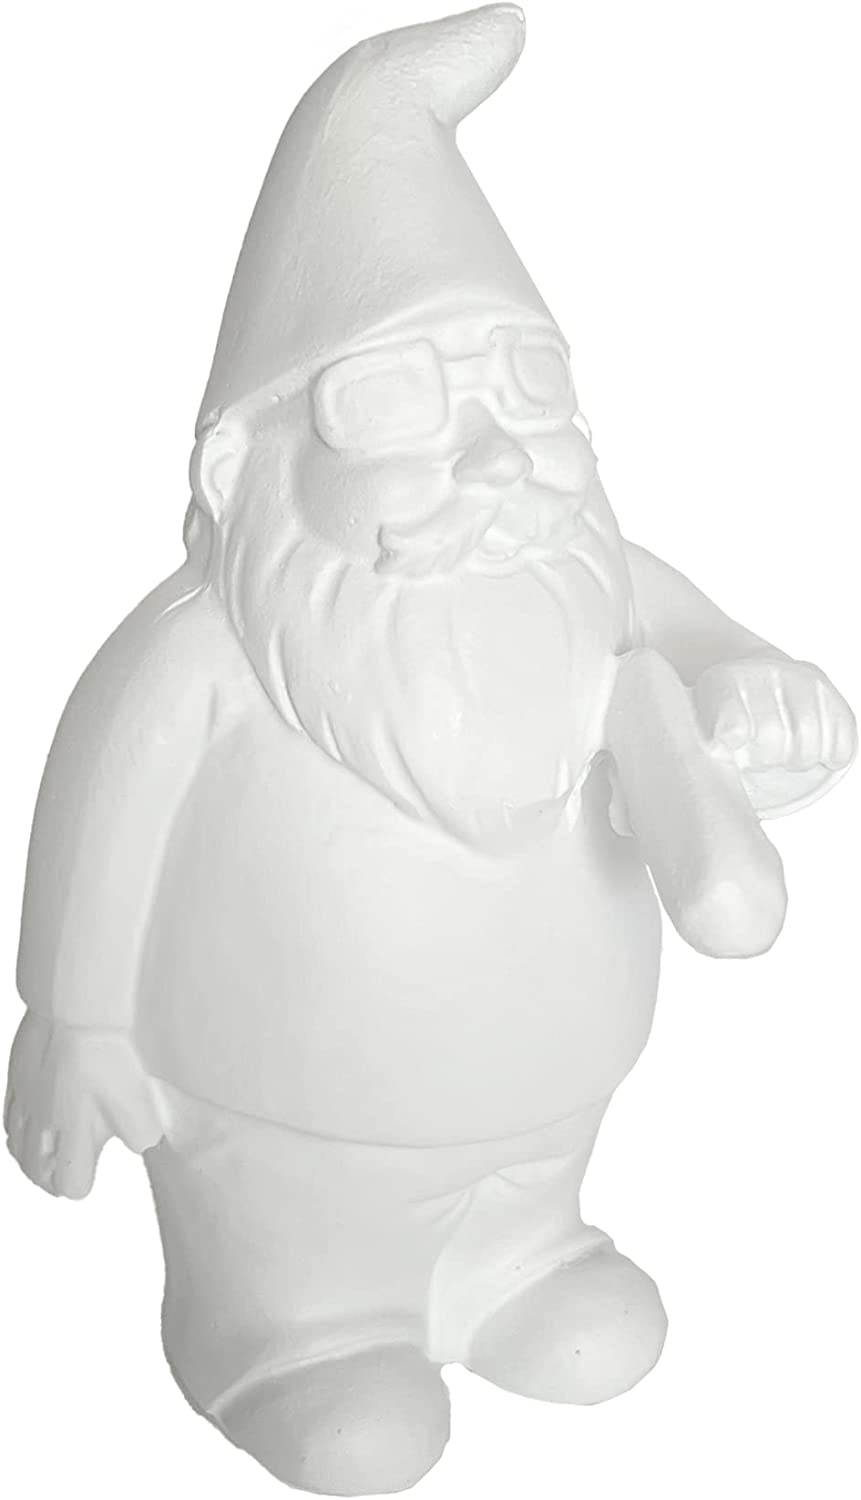 Gnometastic G Mini Gnomes Smoking Gnome Unpainted Statue 3 5in Tall Diy Paint Your Own Polyresin Indoor Outdoor Funny Garden